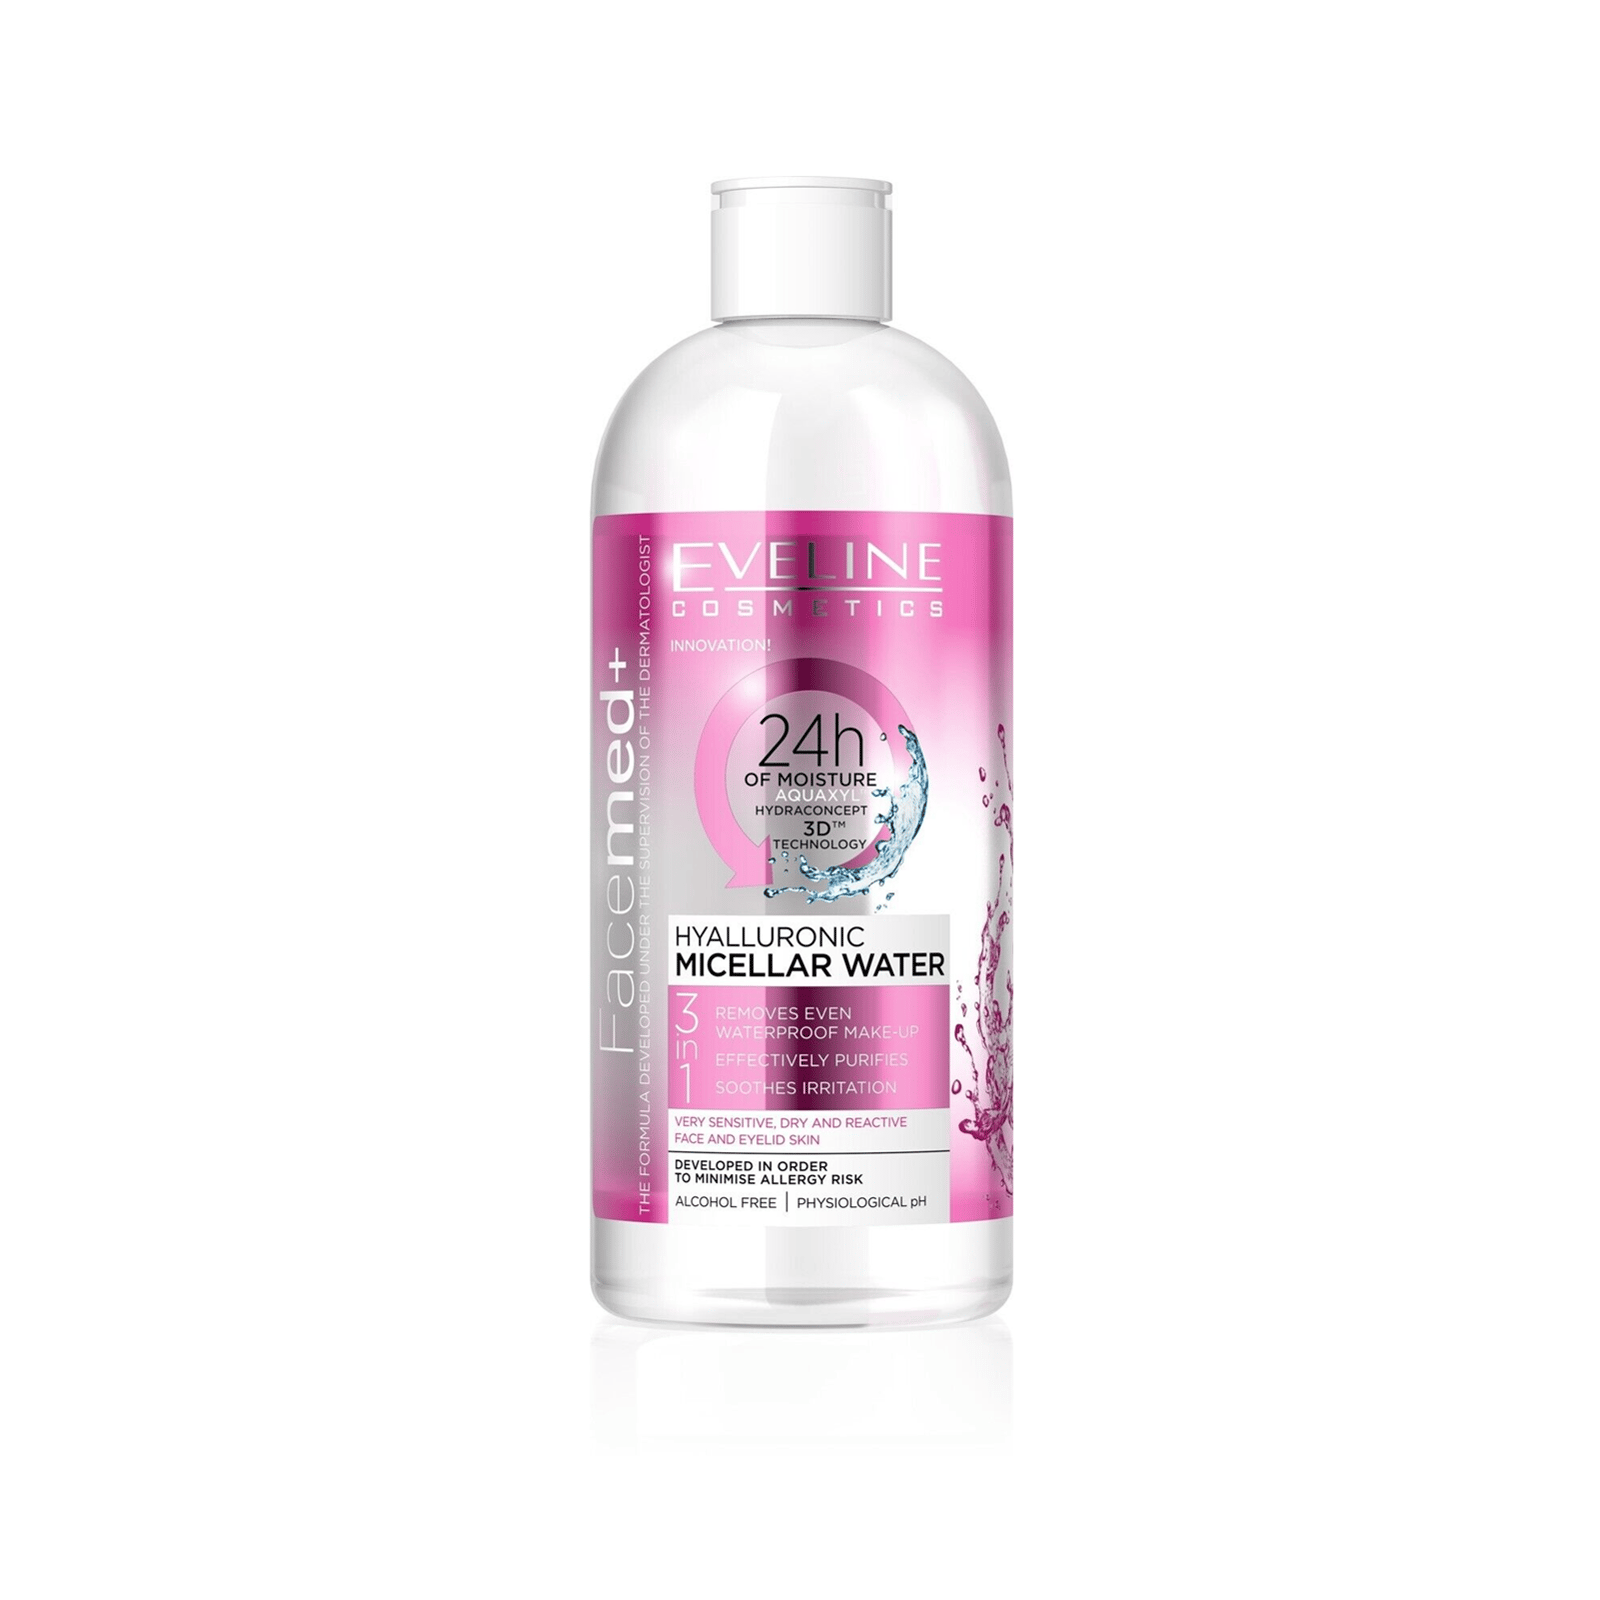 Eveline Cosmetics Facemed+ Hyaluronic Micellar Water 400ml (14.08 fl oz)